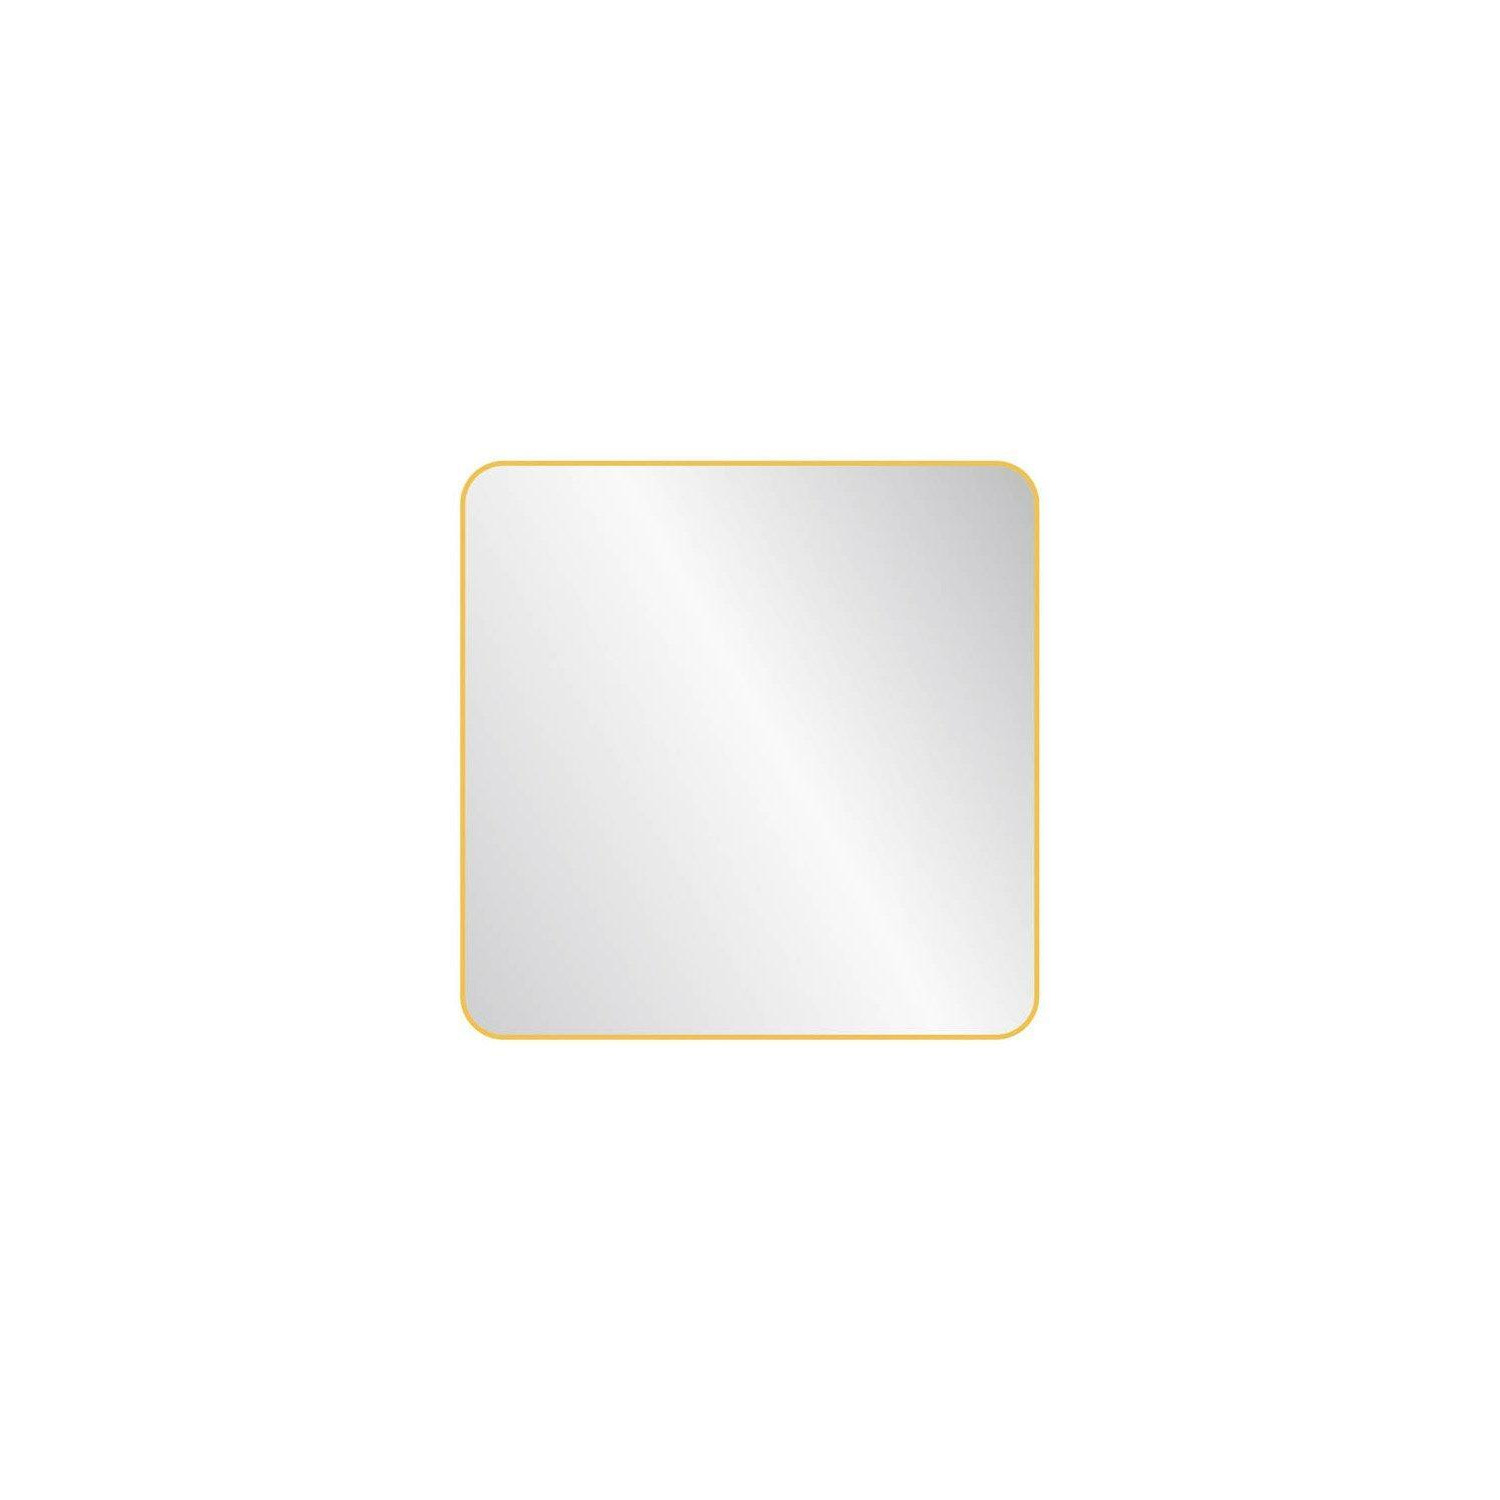 Archer Metal Square Wall Mirror Large 80Cm - image 1